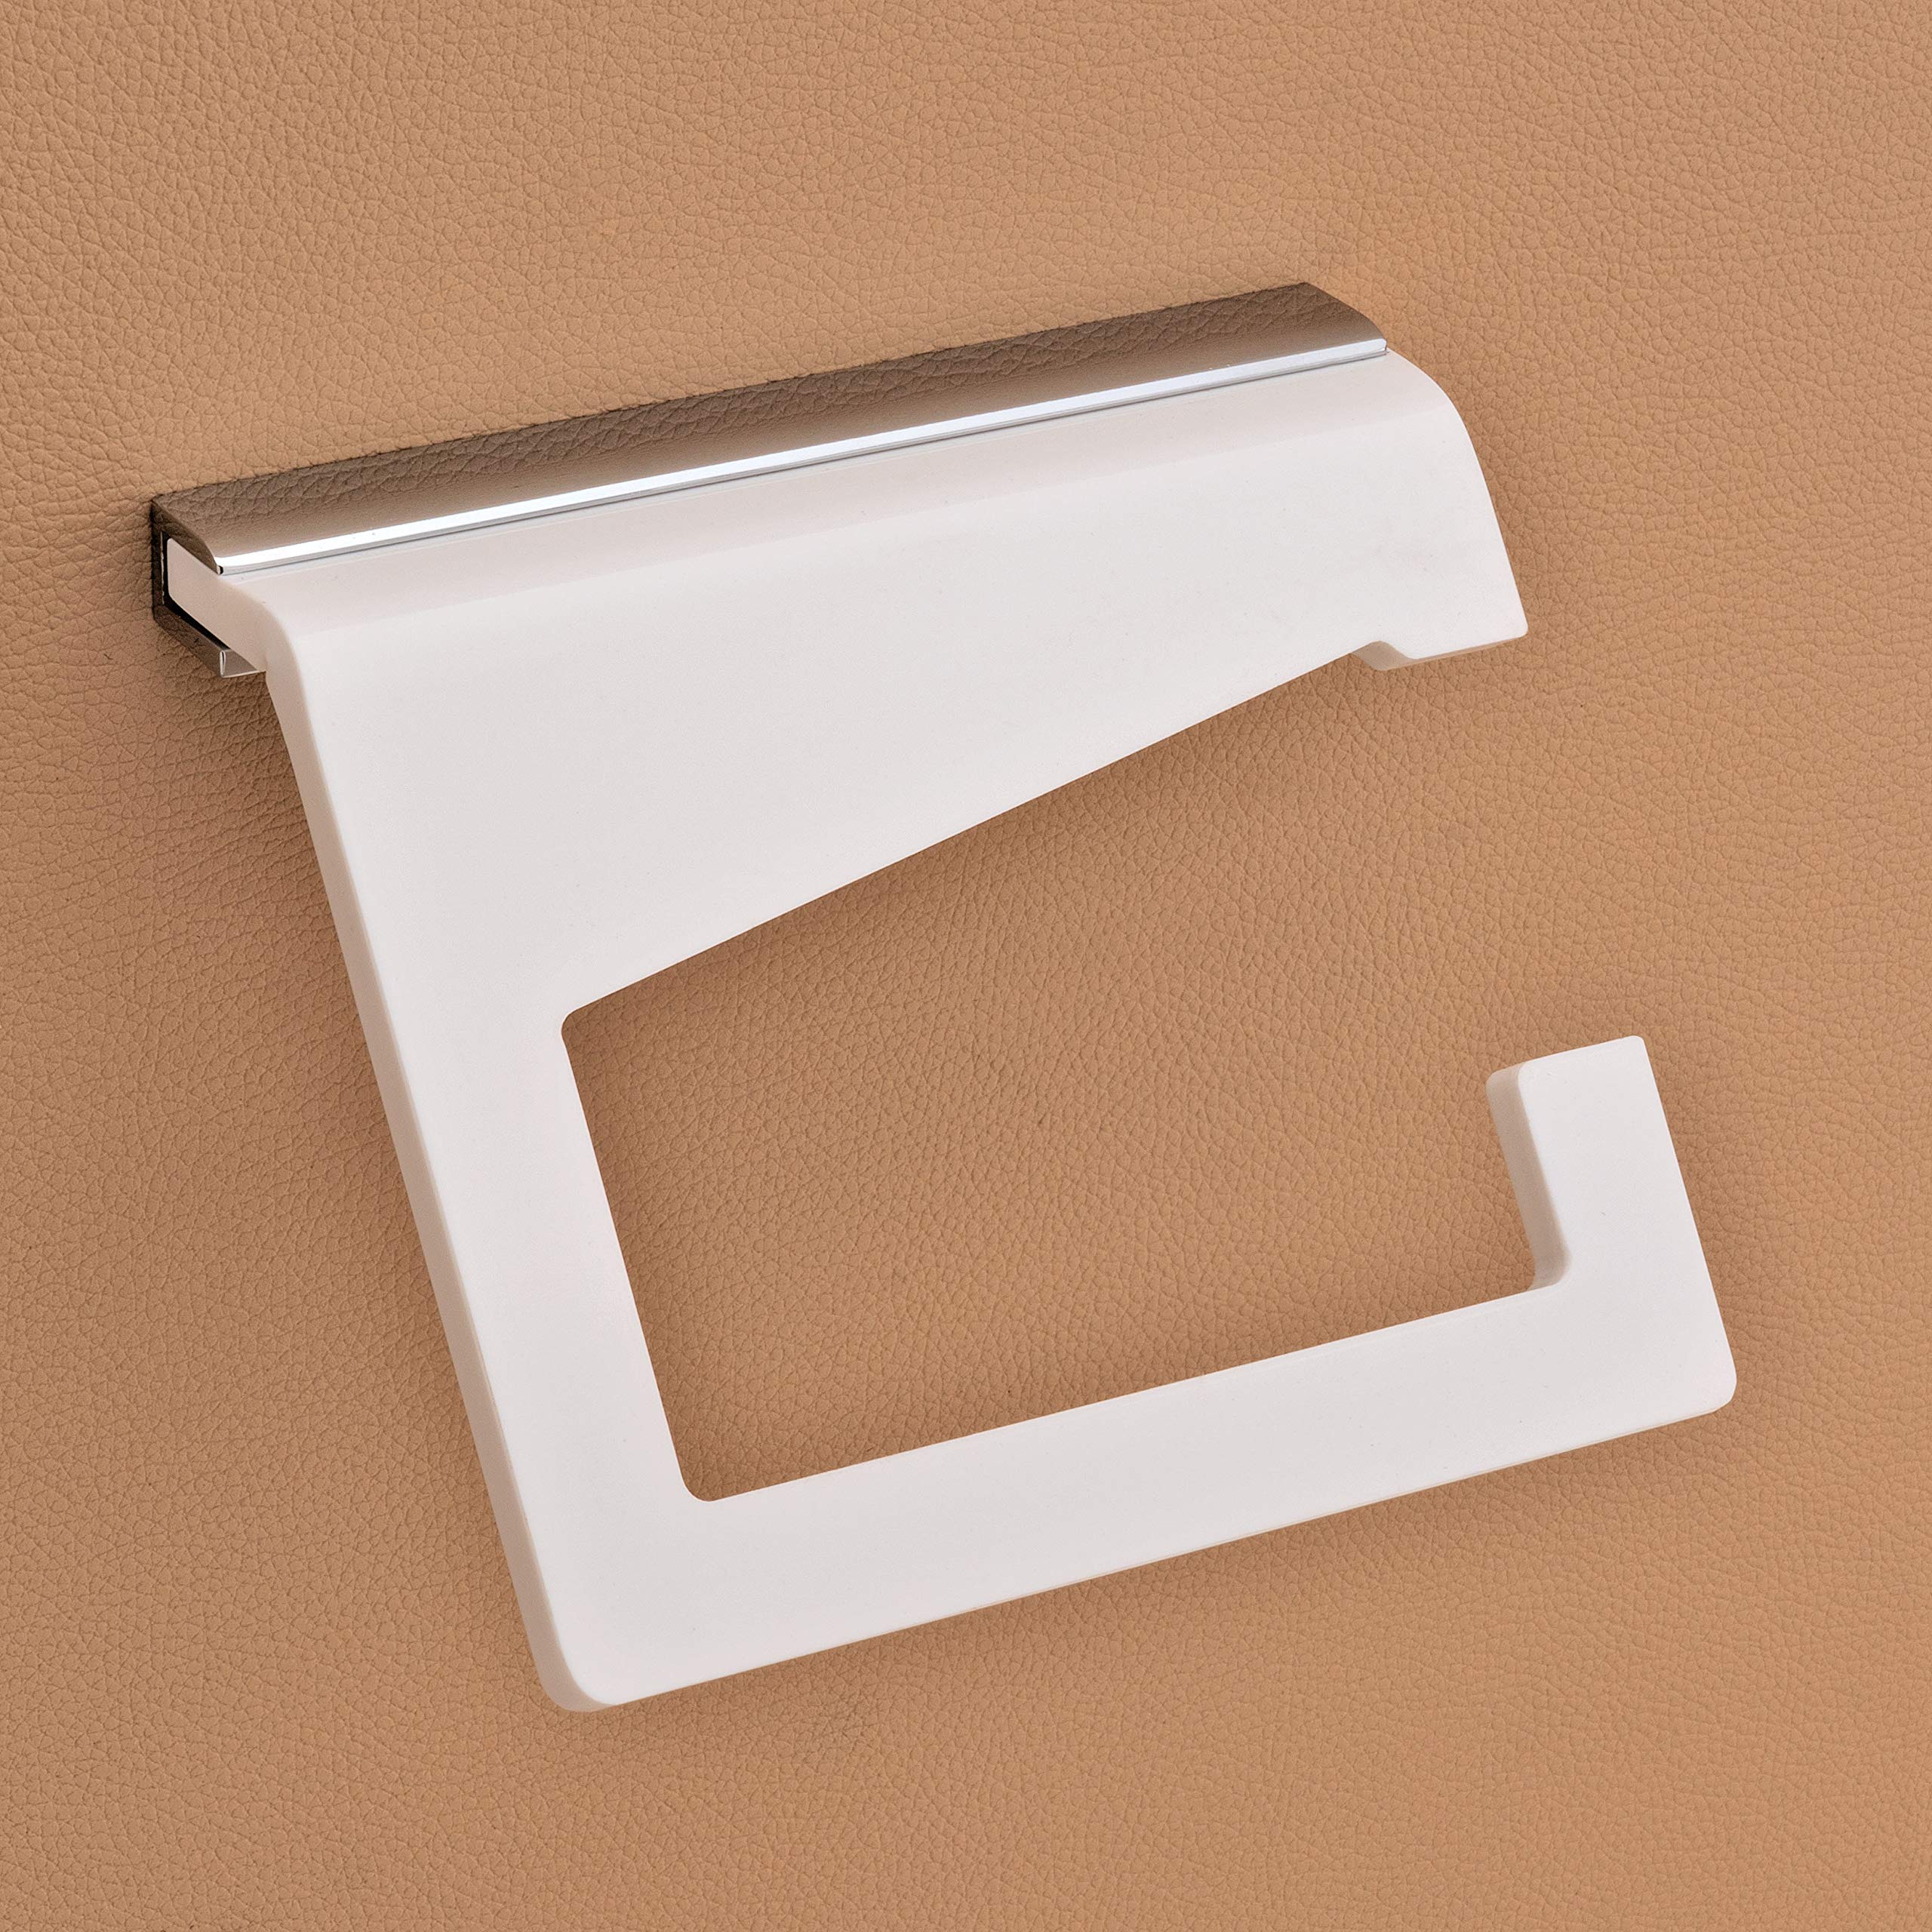 Plantex Opulux 8 mm Acrylic White Toilet Paper Roll Holder Bathroom and Kitchen Accessories - (White)